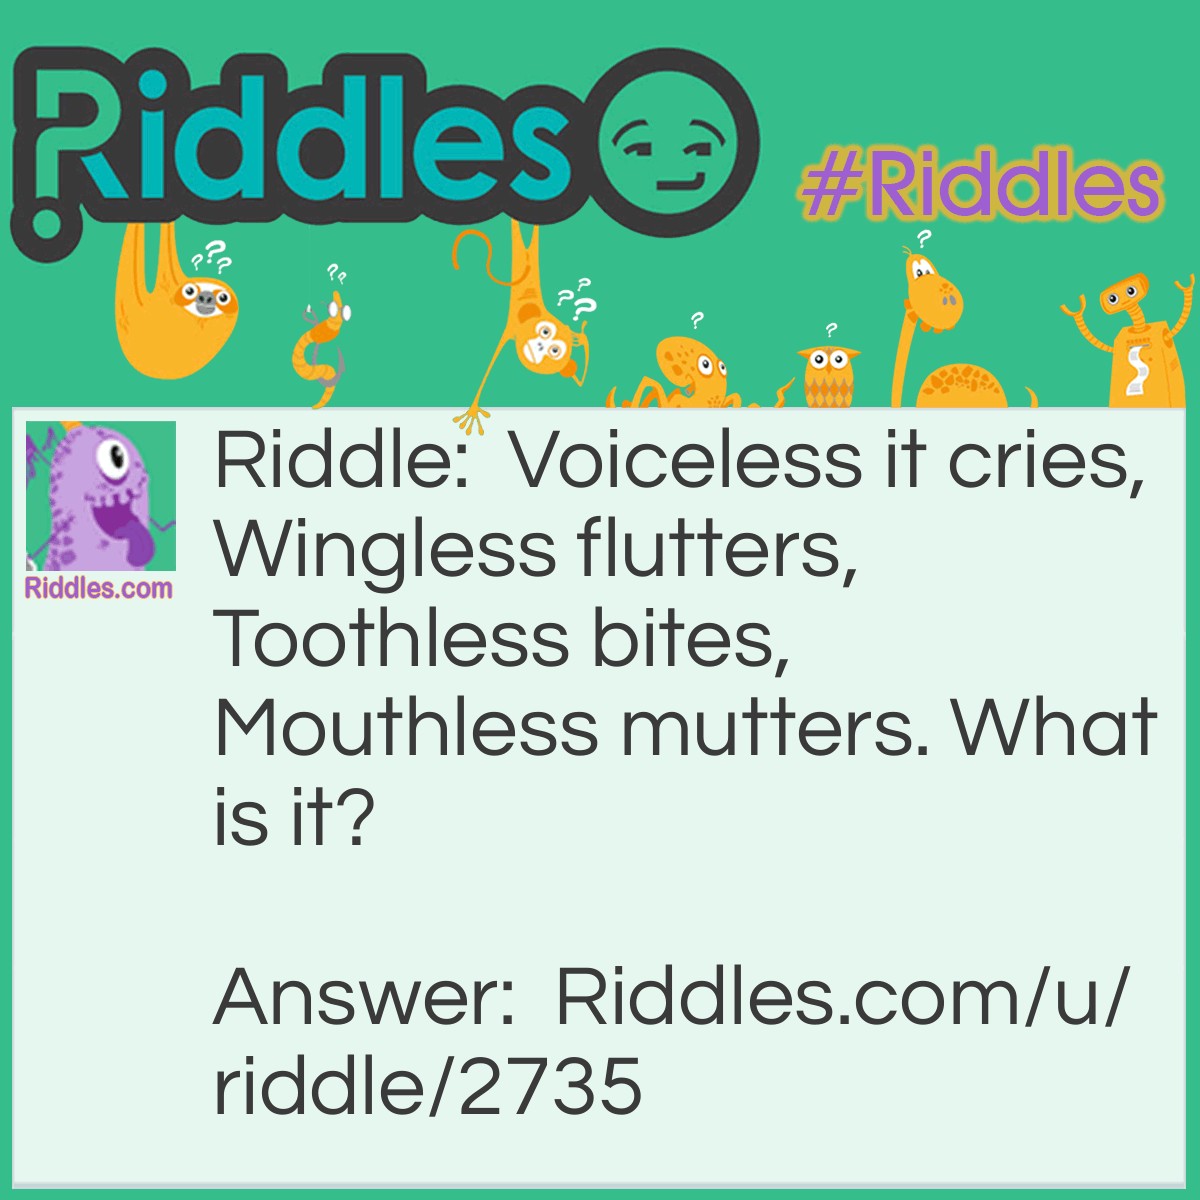 Riddle: Voiceless it cries, Wingless flutters, Toothless bites, Mouthless mutters. What is it? Answer: Wind.